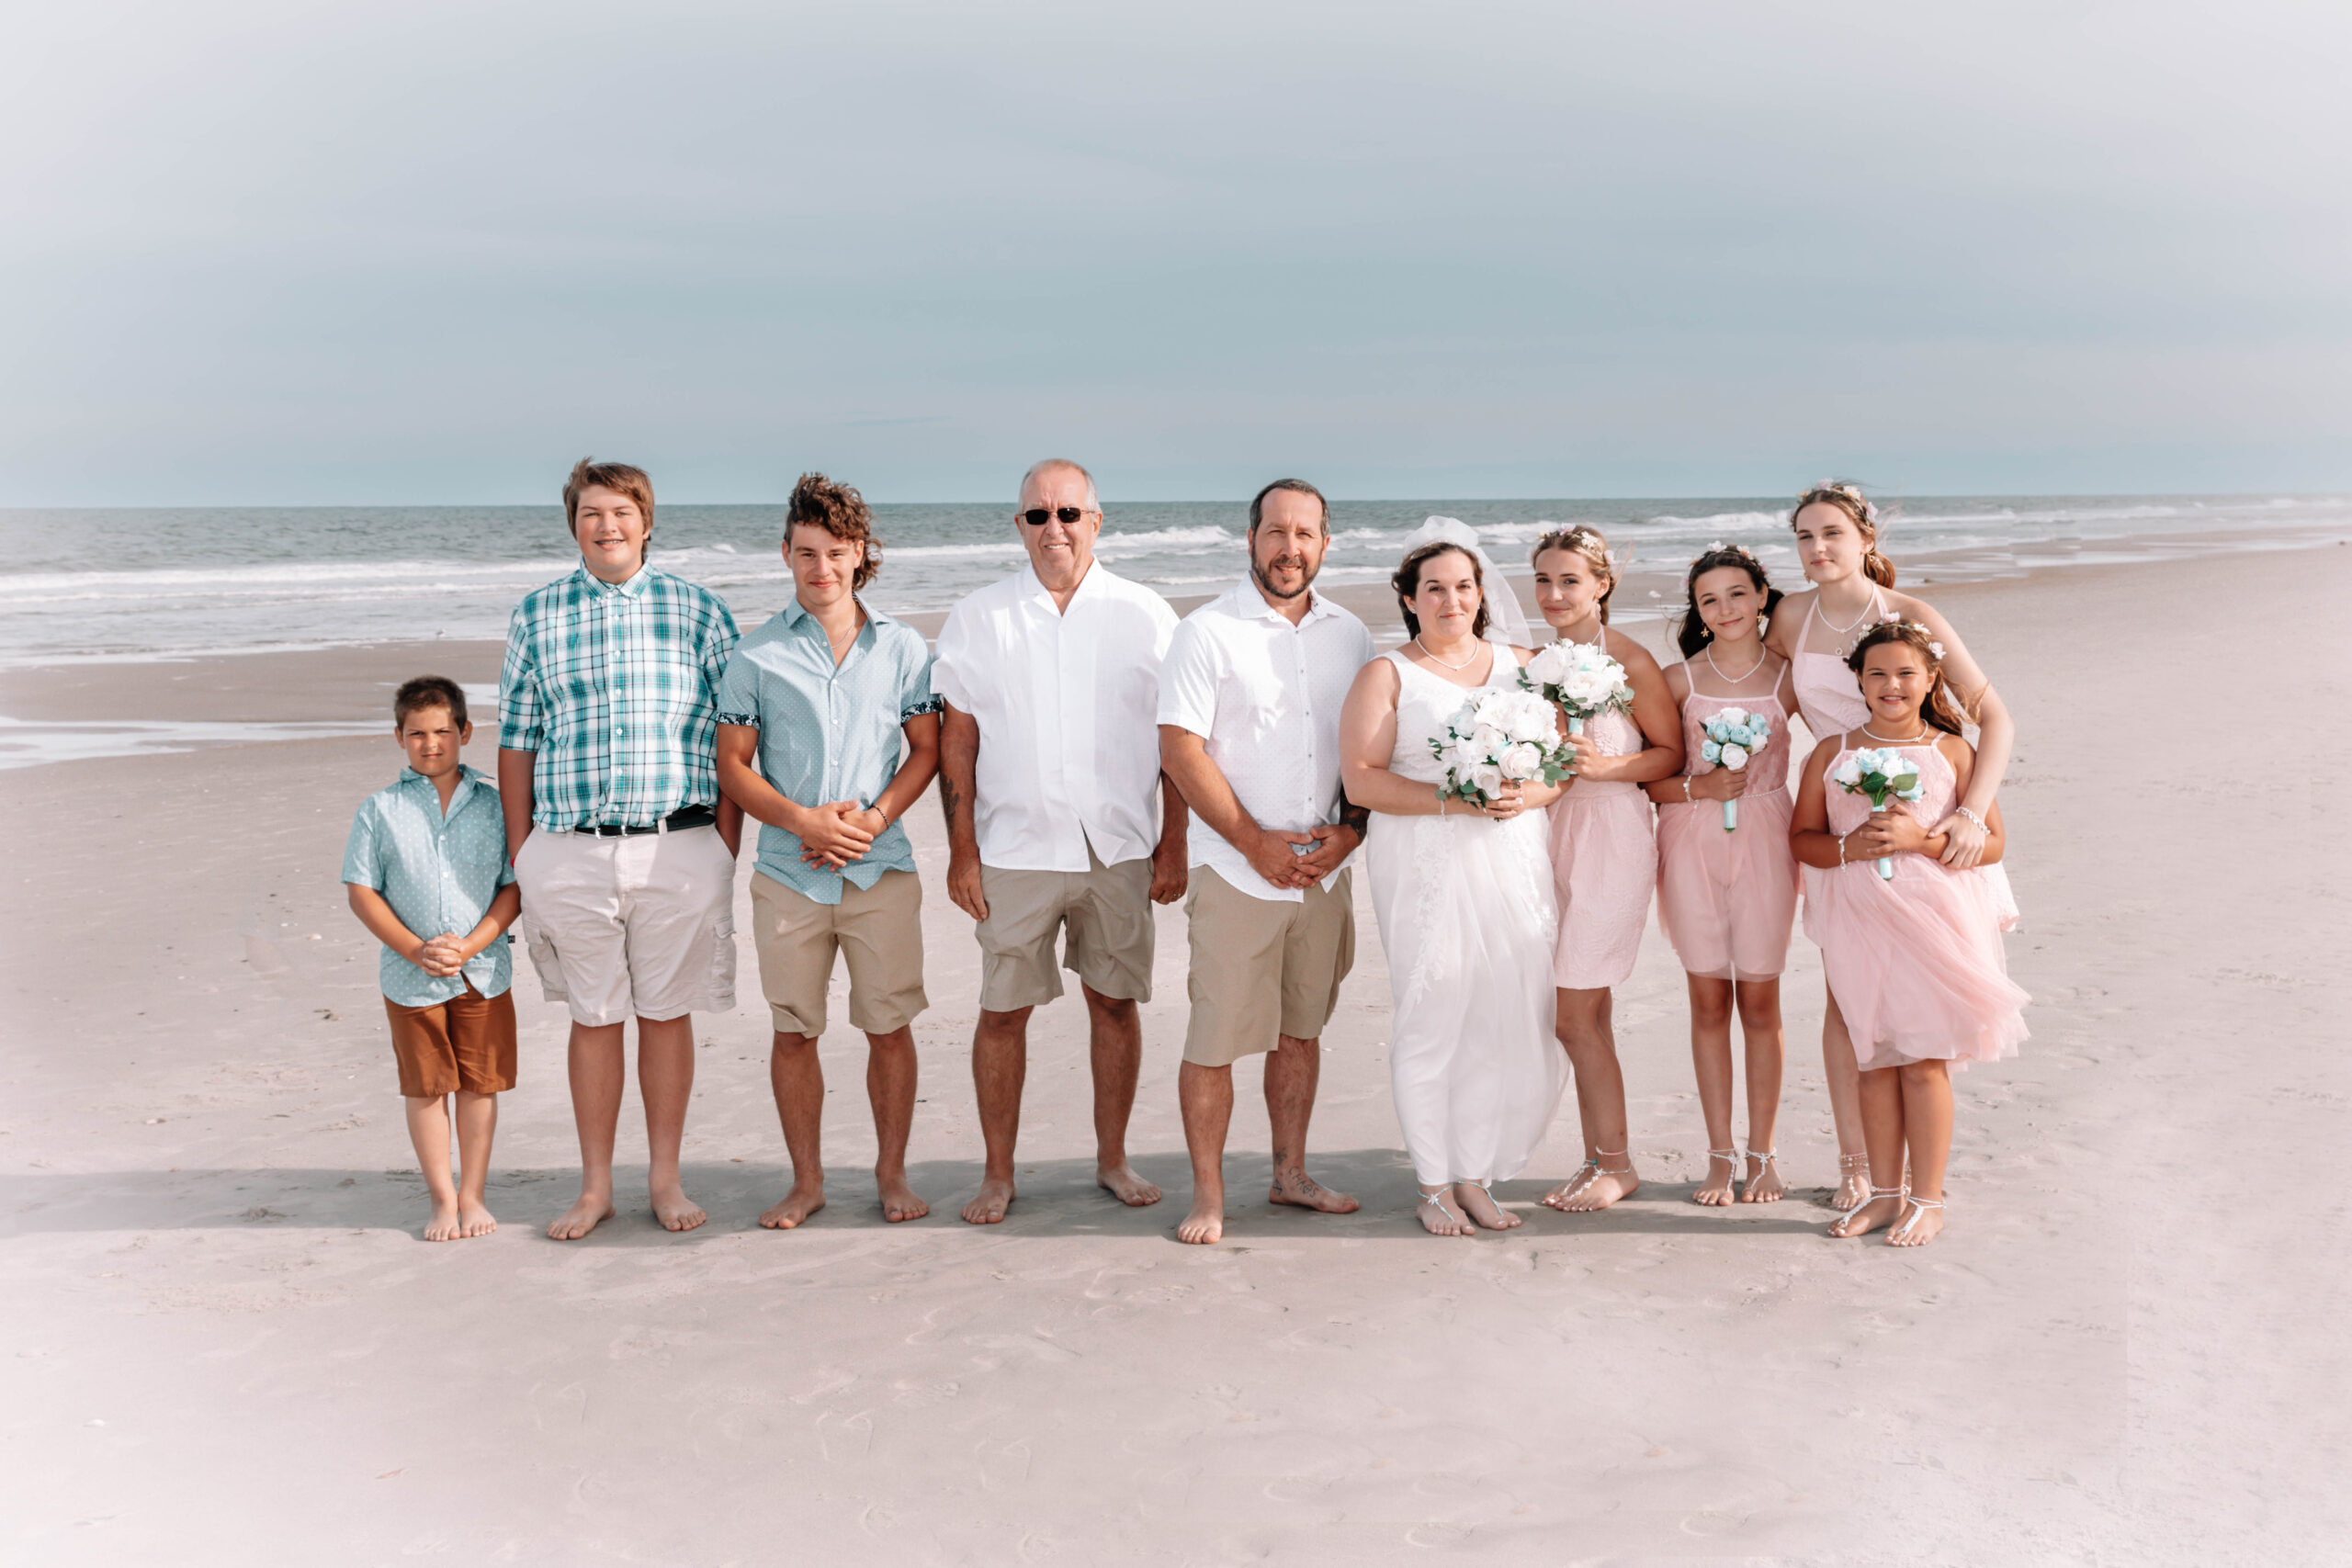 obx family beach photography and weddings mary ks photography obxwedding party corolla obx